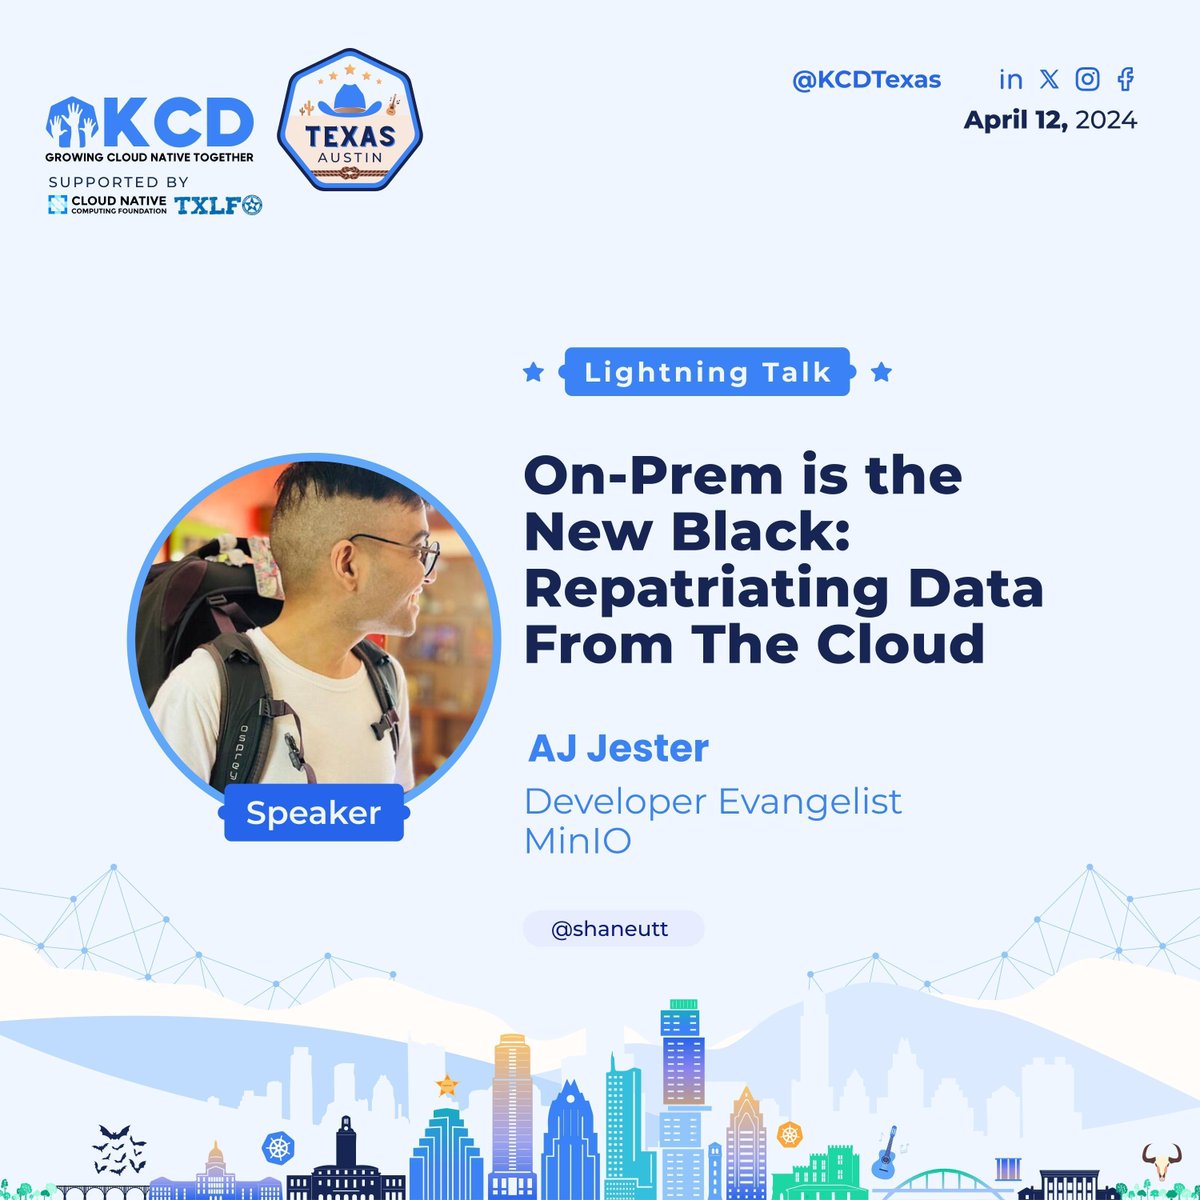 ⭐ Is On-Prem the new trend? 🔄 AJ Jester at #KCDTexas discusses the shift back to on-prem environments from the cloud. A must-attend for those rethinking their cloud strategy! 🔗 texaskcd.com #KCD #TeamCloudNative #CNCF #TXLF #ATX